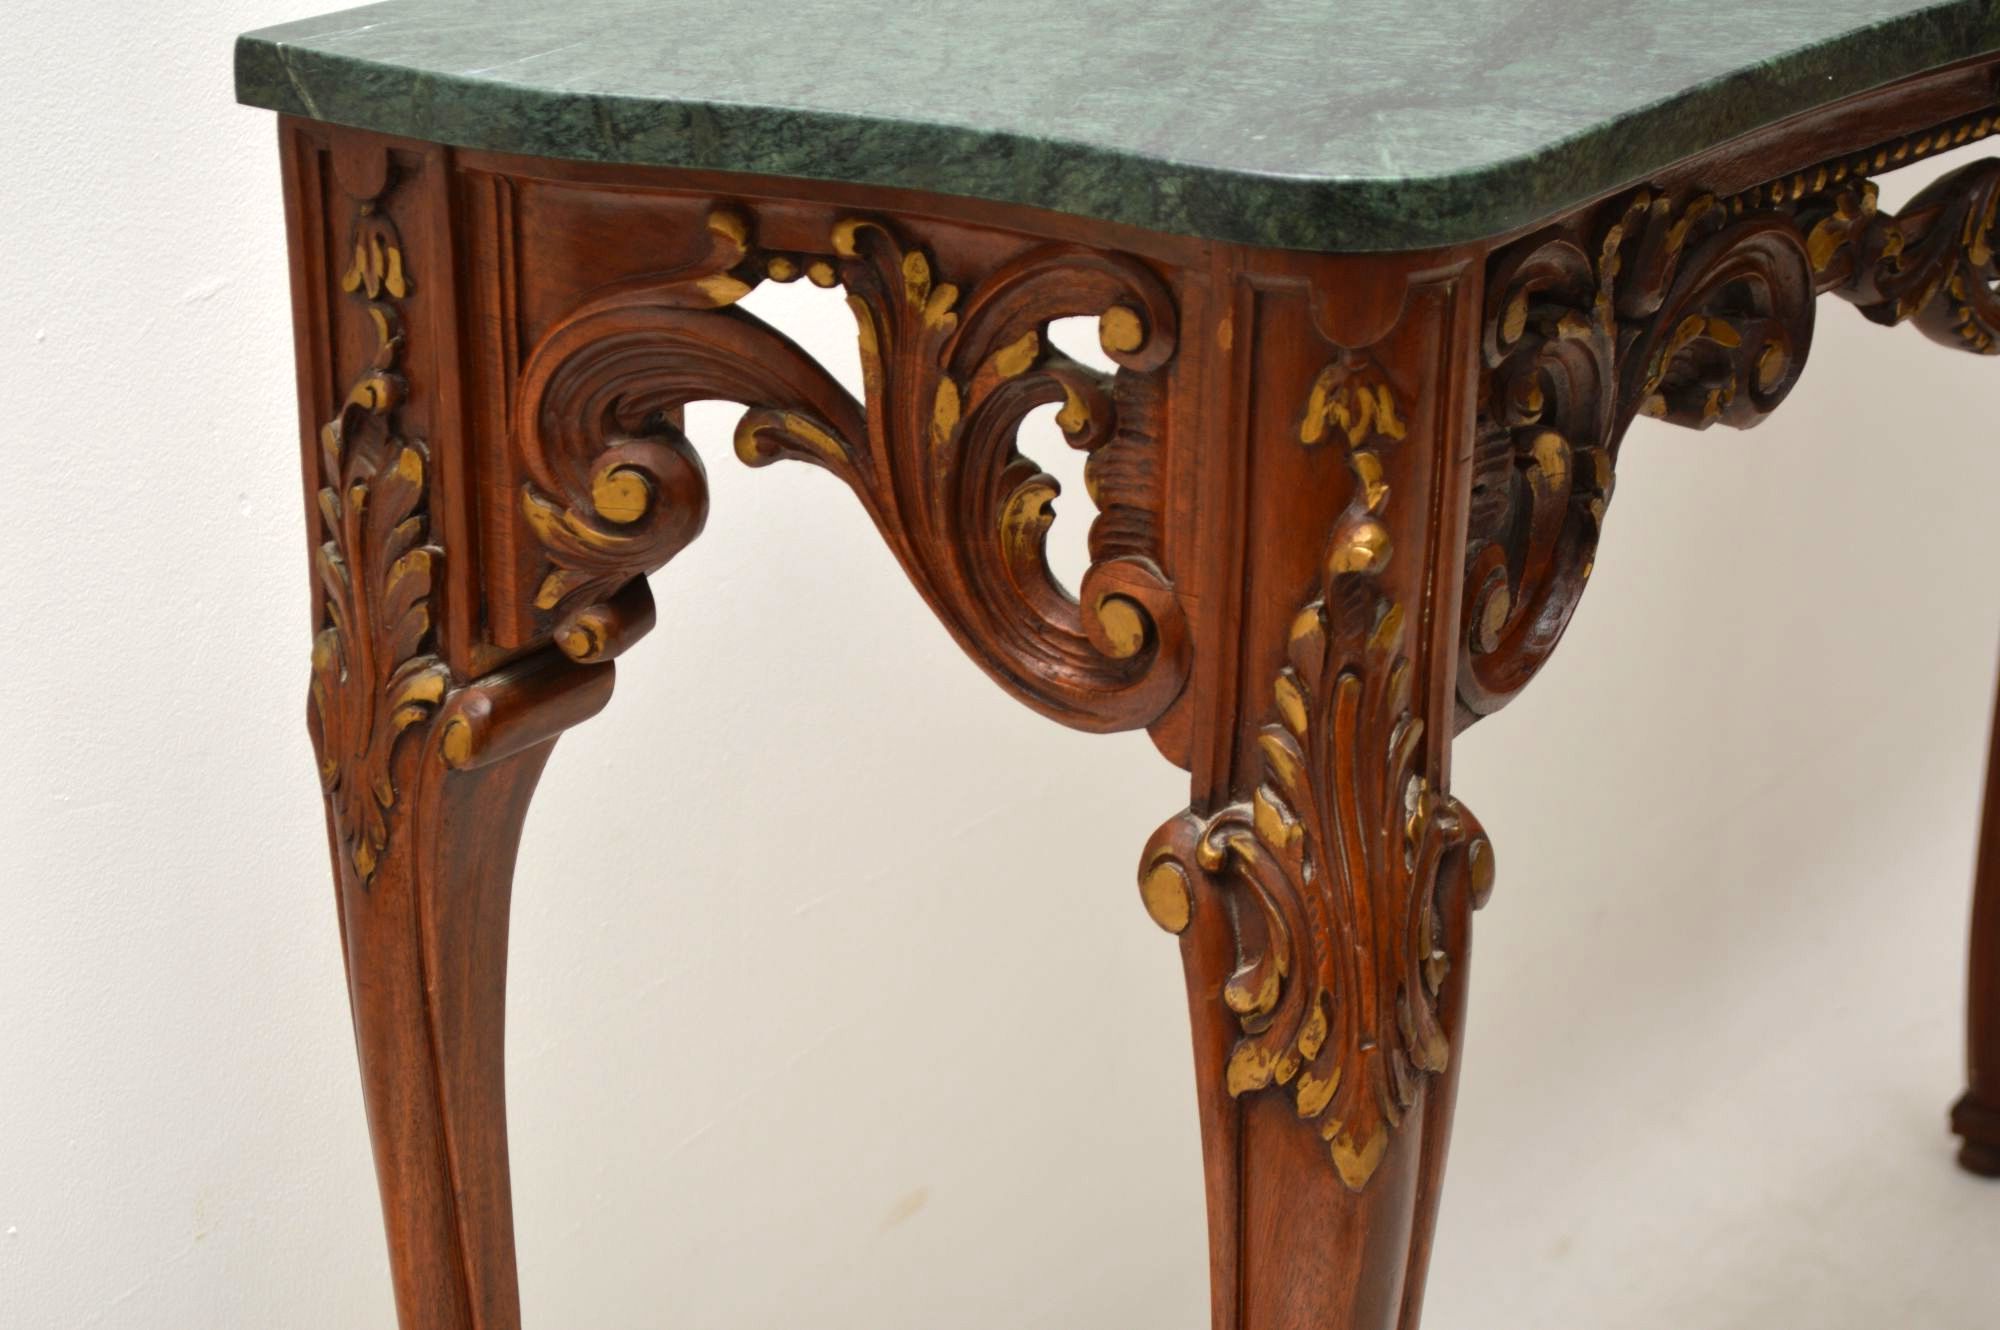 Antique French Carved Walnut Marble Top Console Table Regarding Well Liked Antique Blue Wood And Gold Console Tables (View 2 of 10)